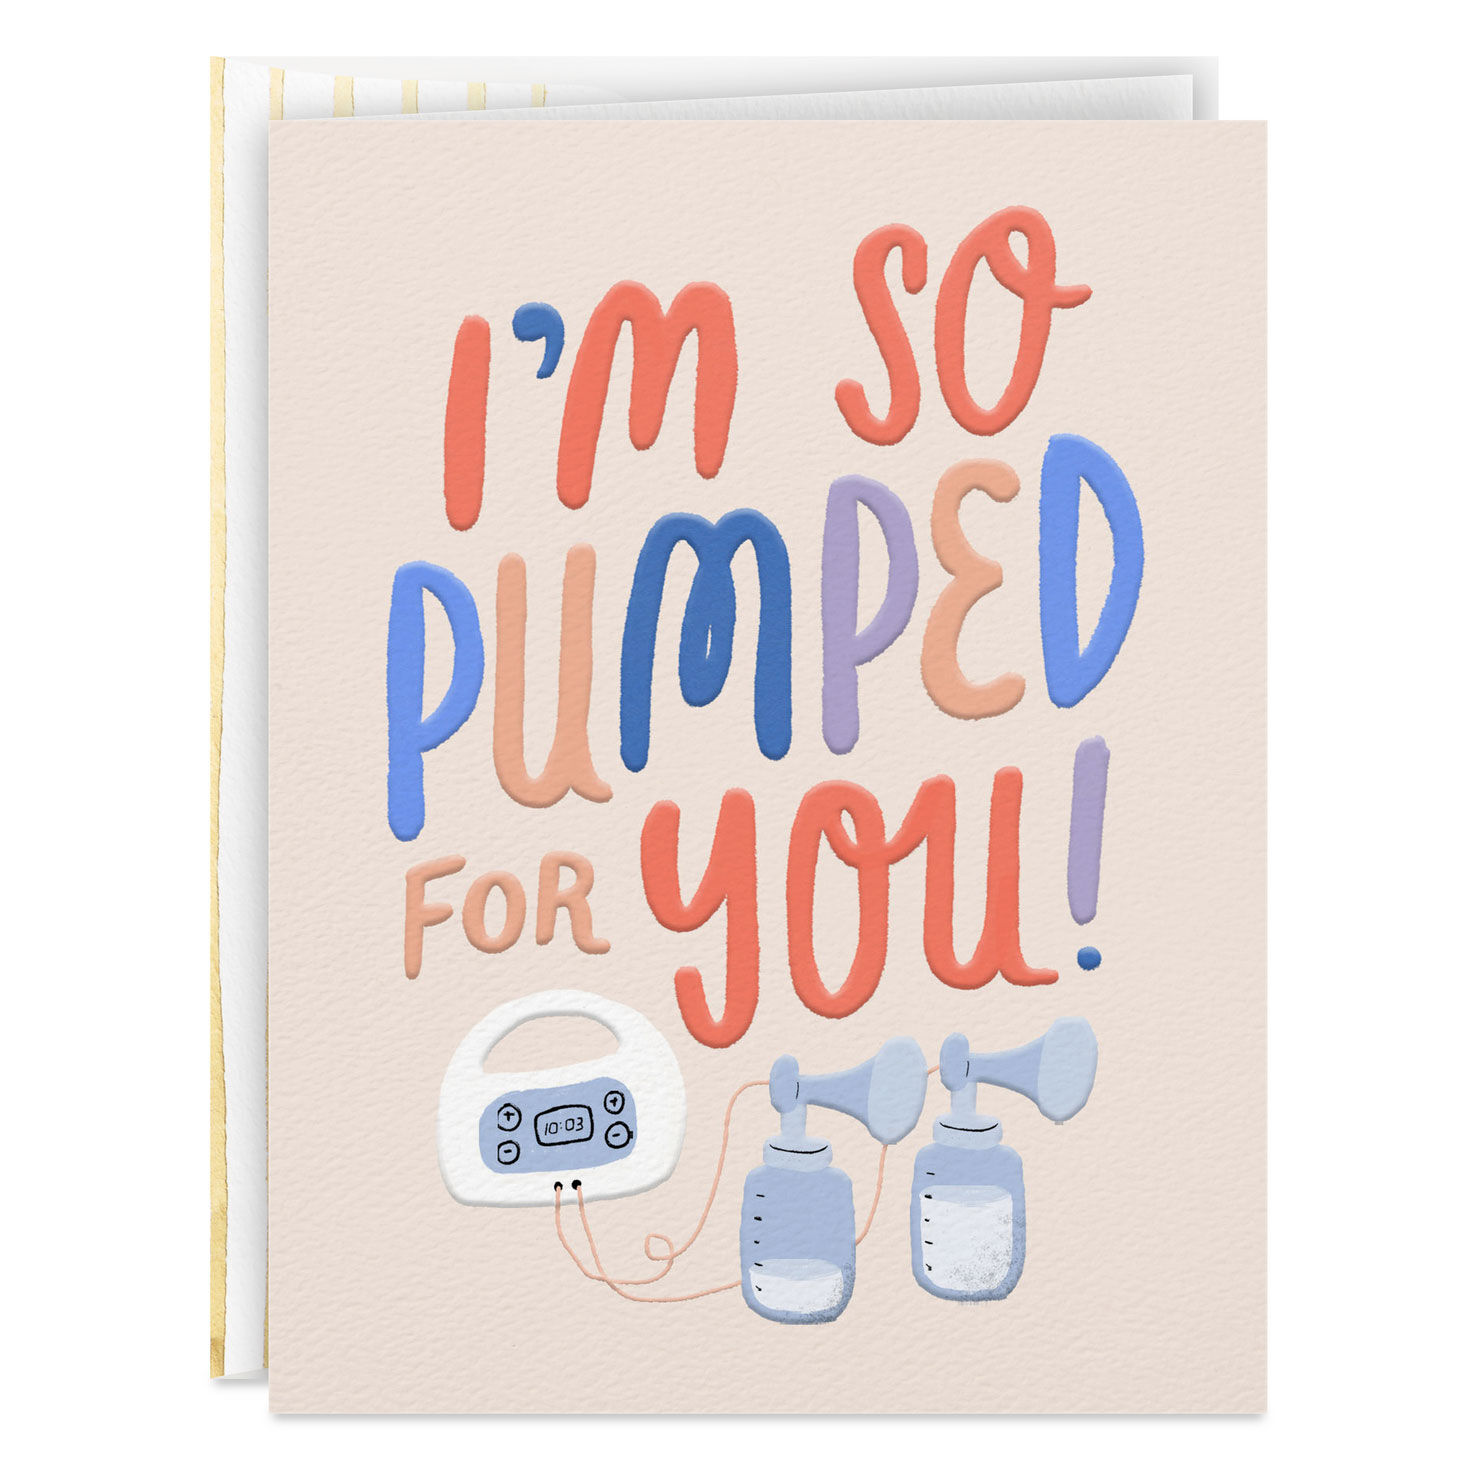 So Pumped for You New Baby Congratulations Card for only USD 3.99 | Hallmark